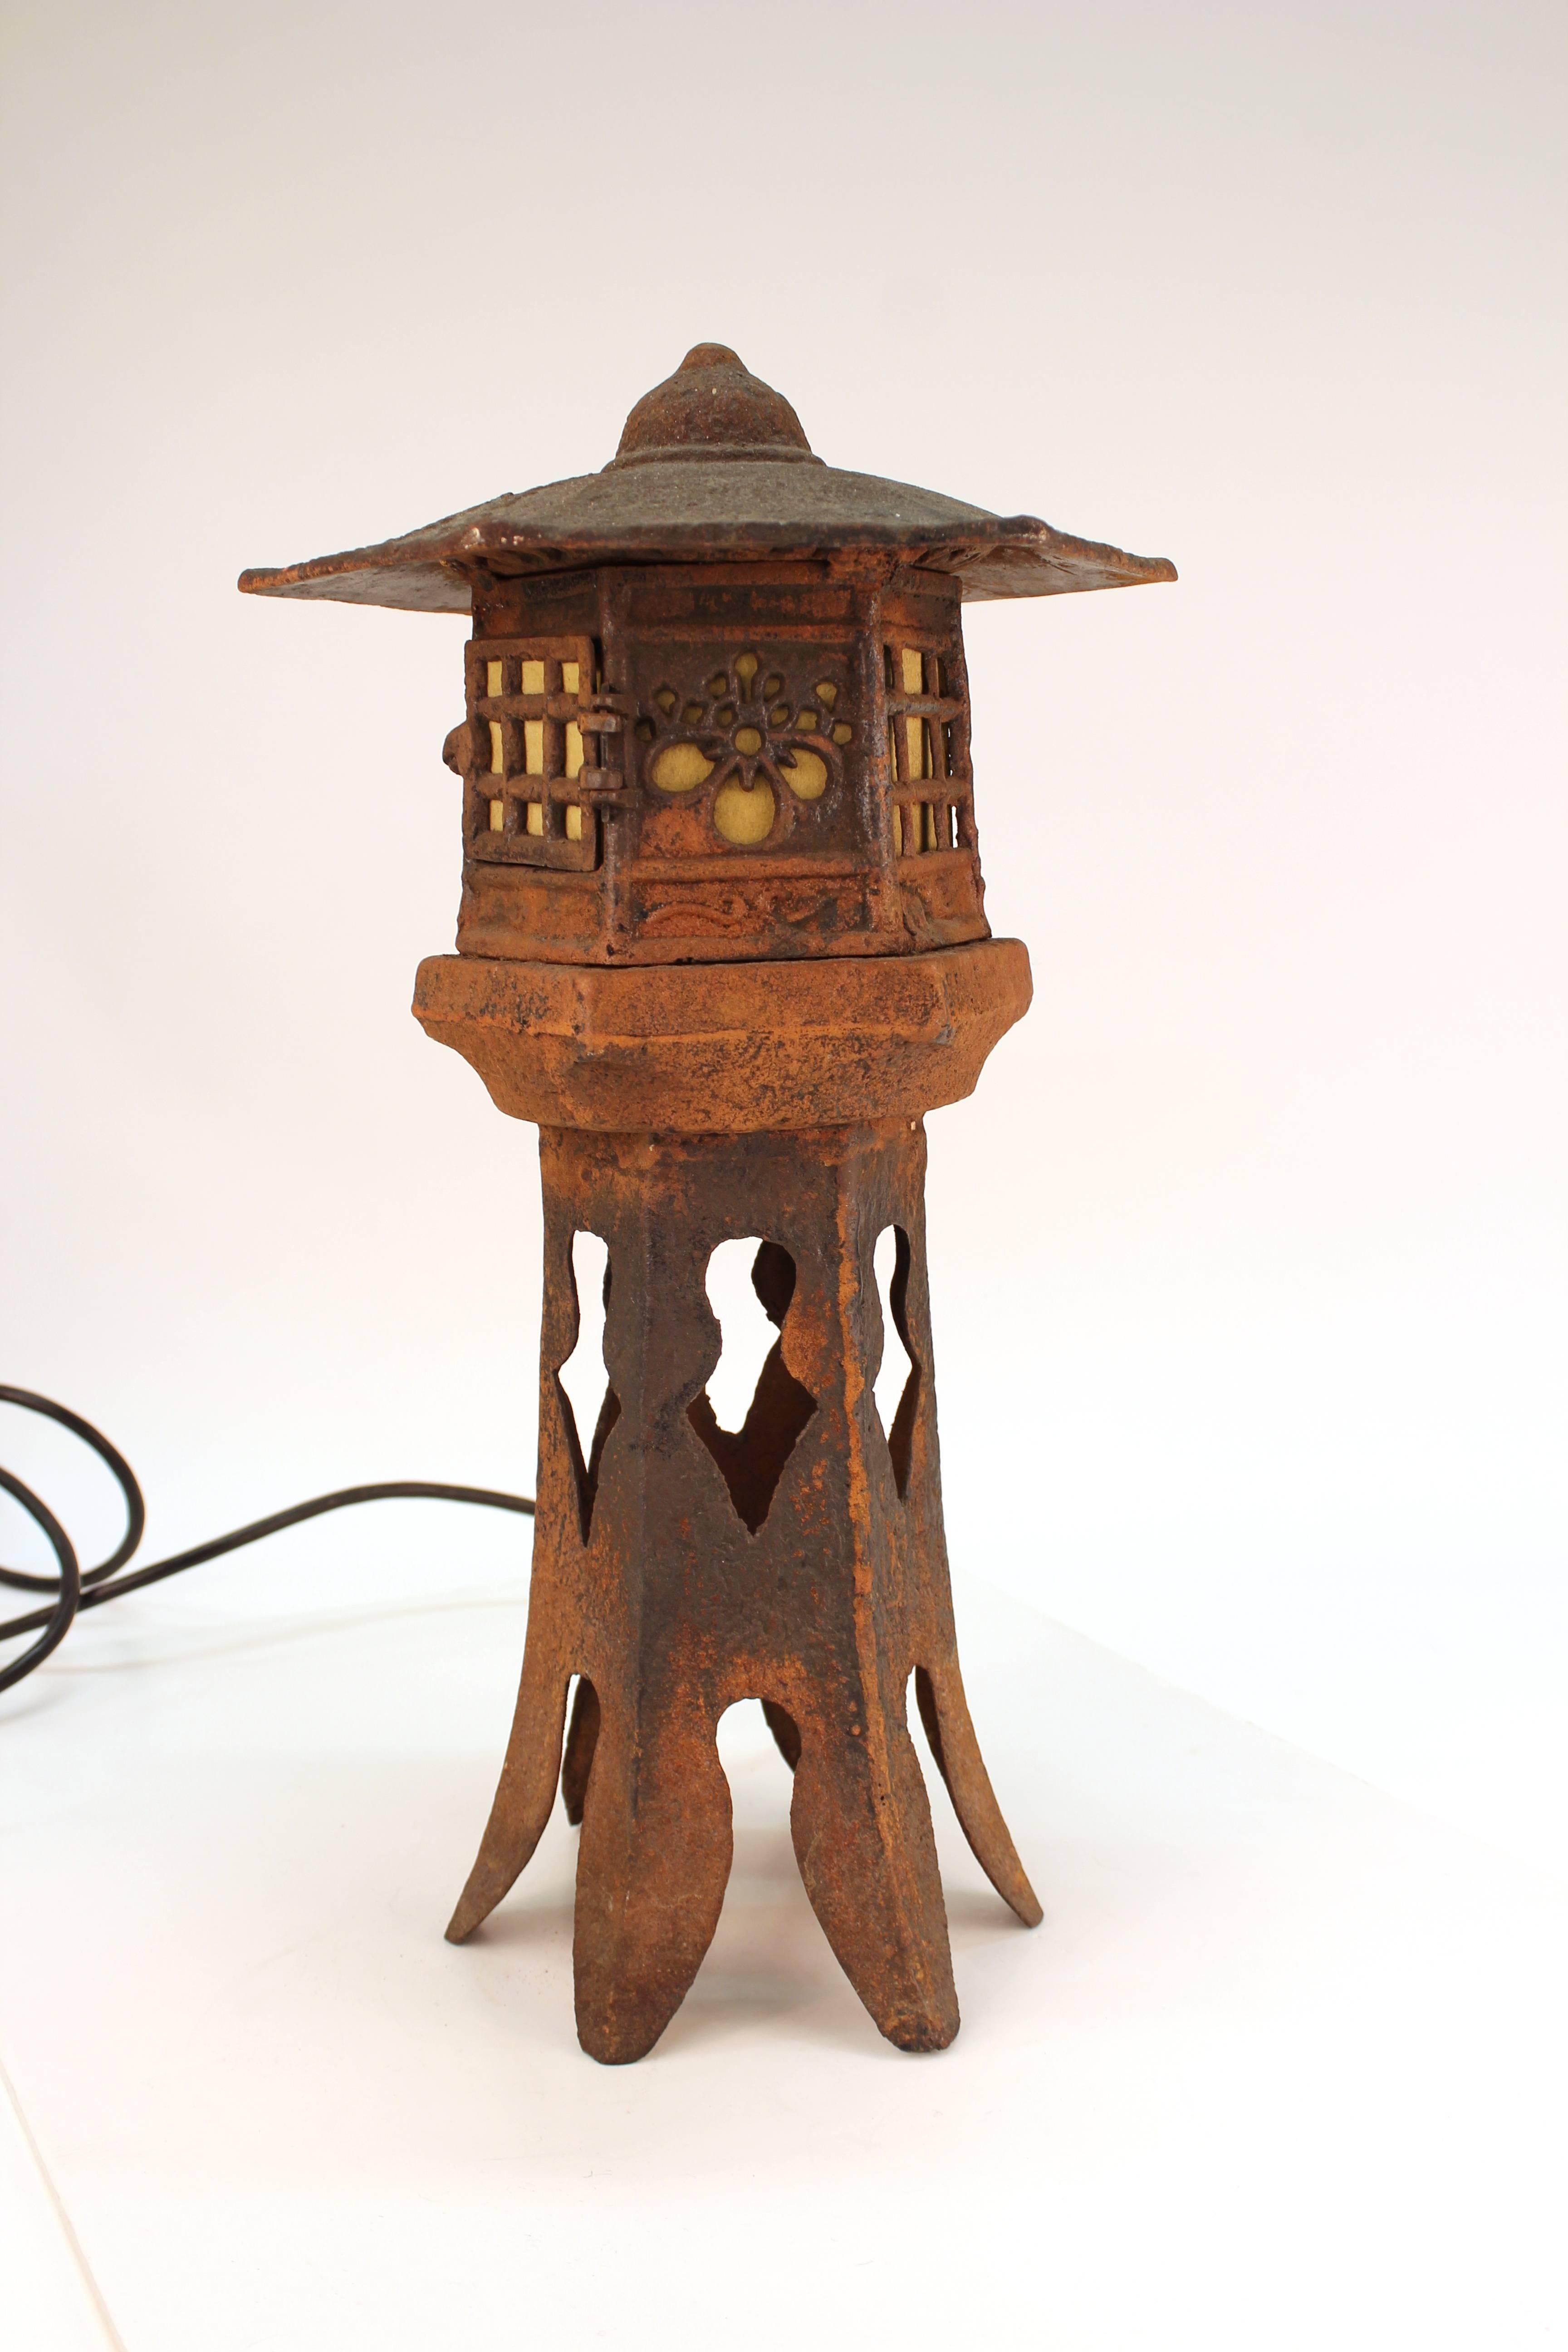 Table lamp crafted in cast iron in the form of a Pagoda. The piece stands on split petal legs while the bulbs are housed at the top of the tower behind screened 'windows.' The bulbs are accessible through a door at the head of the pagoda. The crown